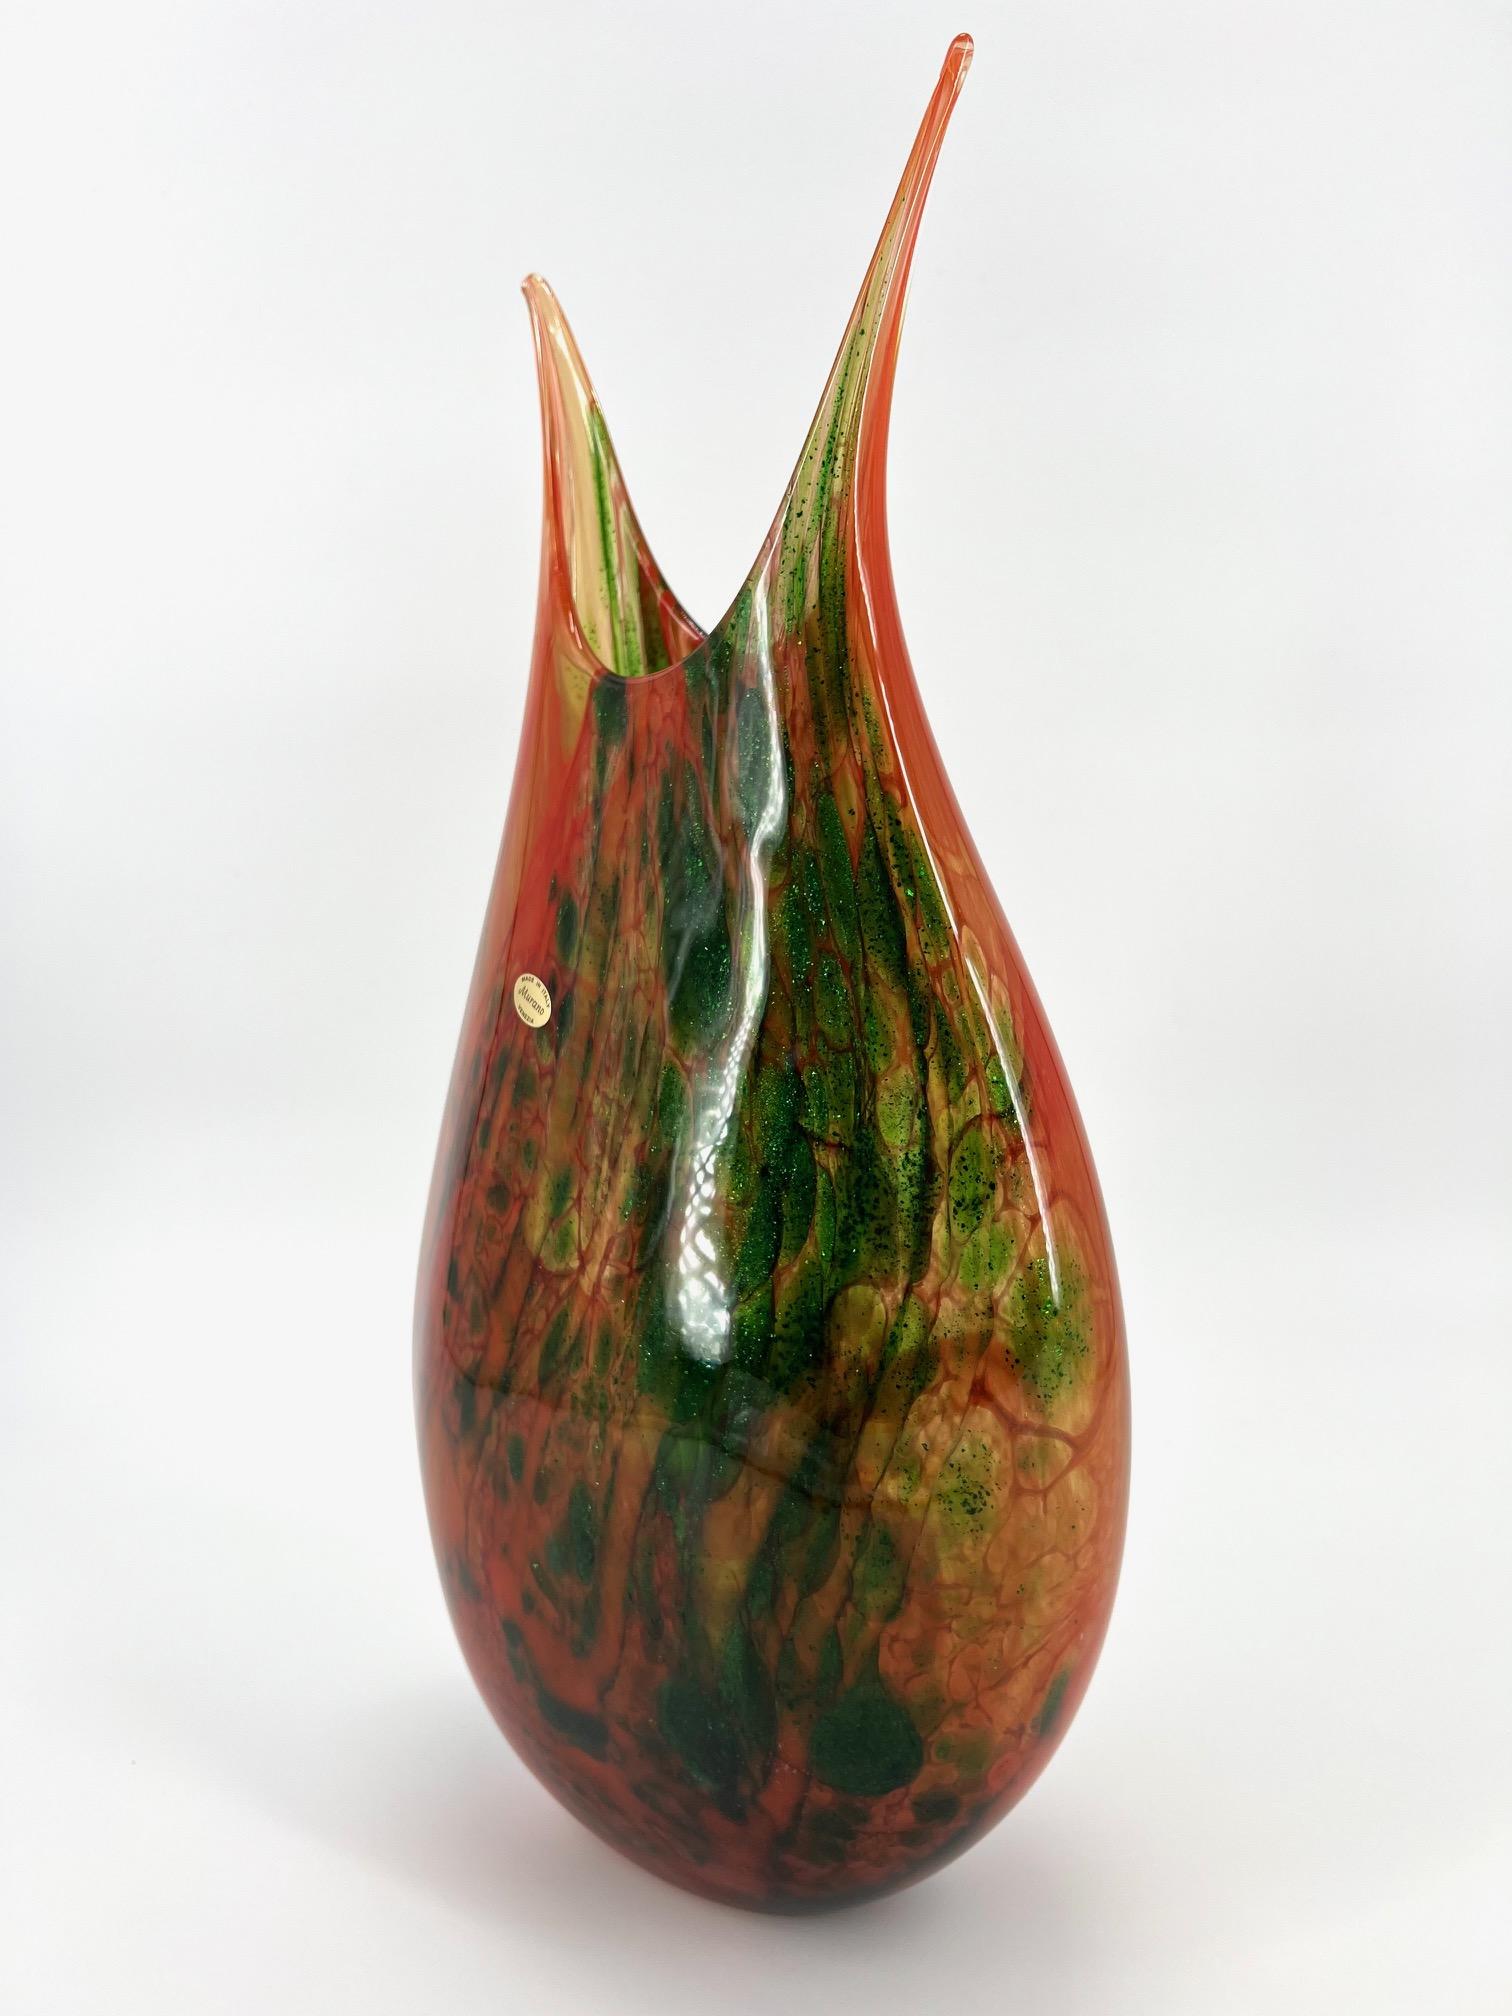 Our main goal is to evoke emotions through the creation of unique and stunning Murano glass art pieces. This art-vase, in particular, is a testament to the creativity and skill of our Master Glassblowers. It is beautifully handcrafted using